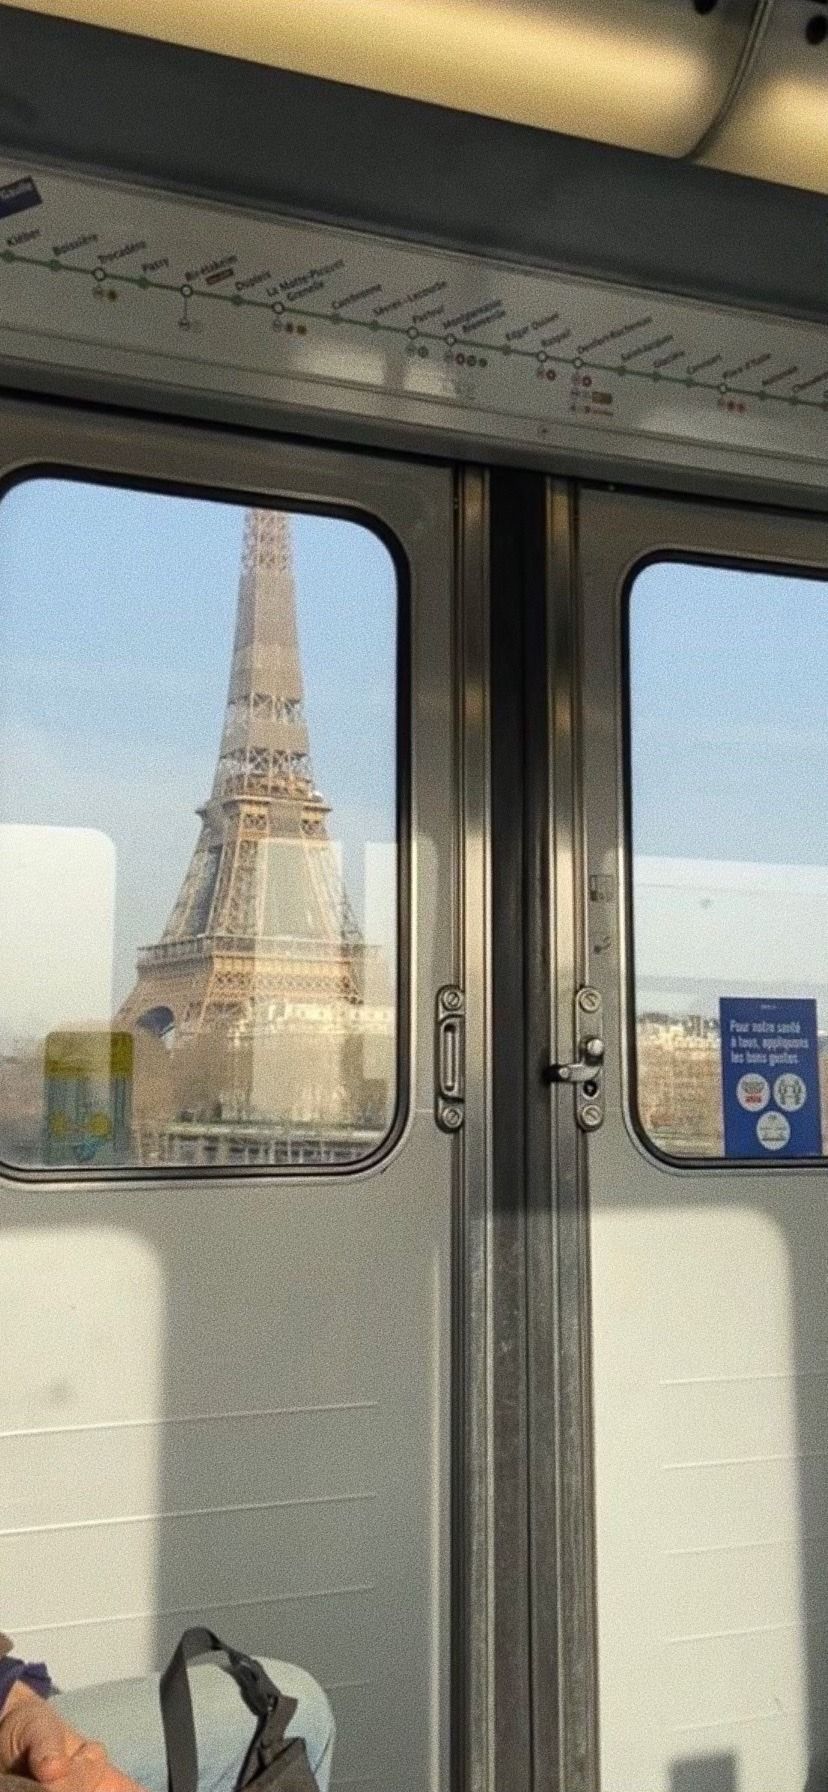 A view of the Eiffel Tower from a train. - Paris, France